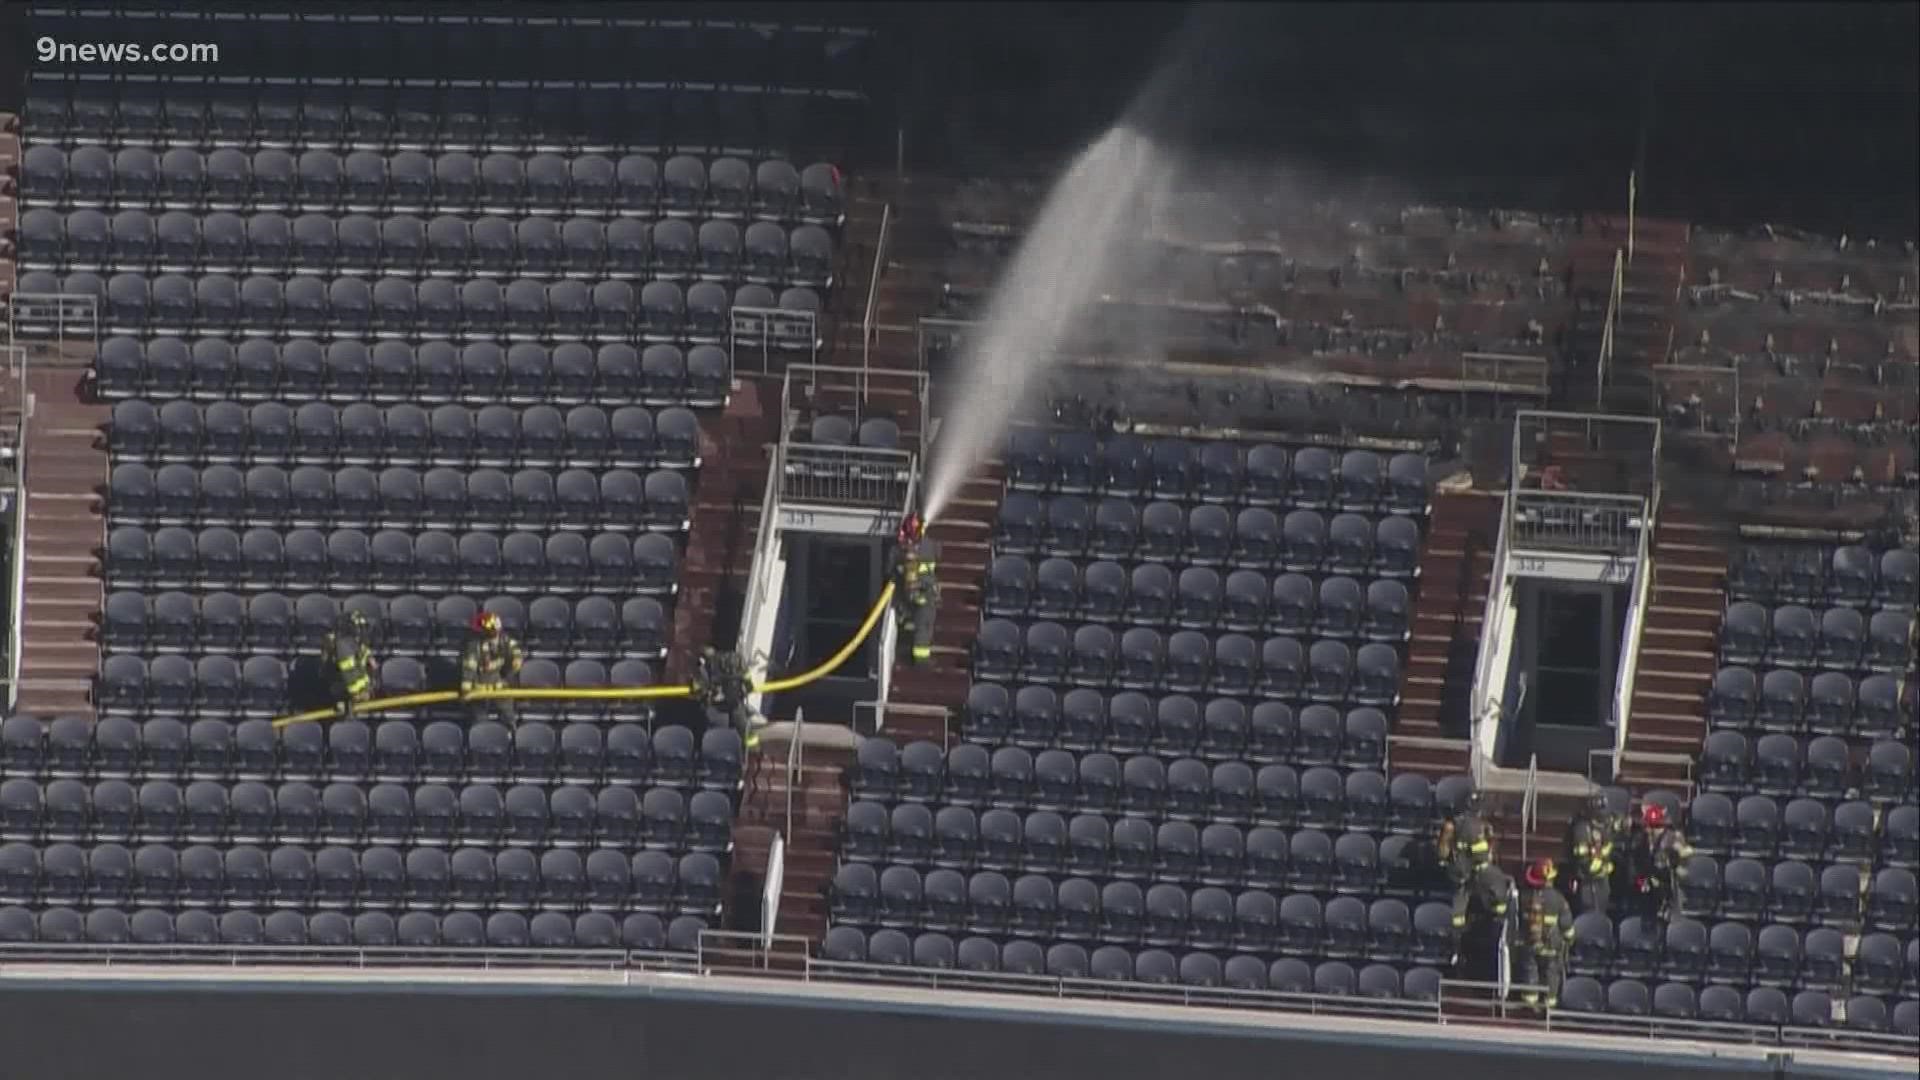 RAW: Damage after fire burns seats, suite at Broncos stadium